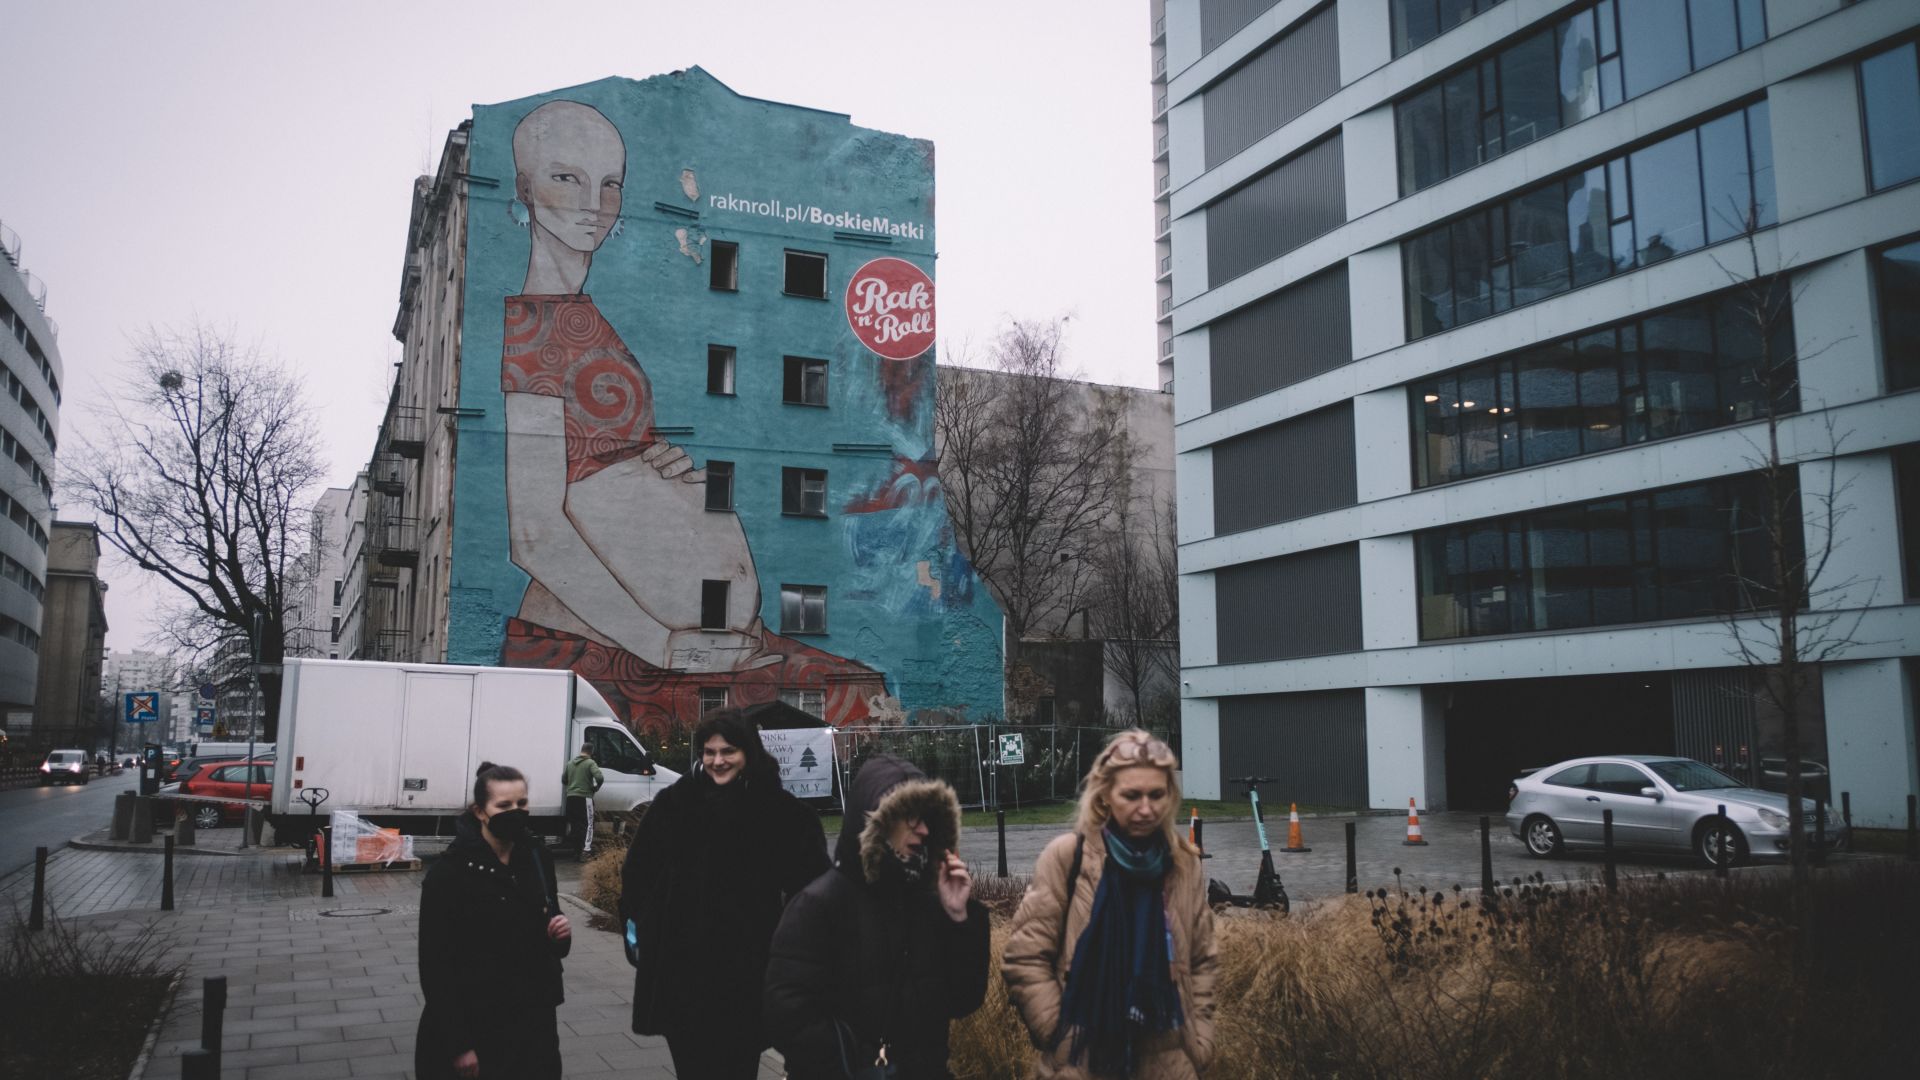 A mural shows a pregnant woman on a building in central Warsaw. Abortion lately has been at the centre of the social and political